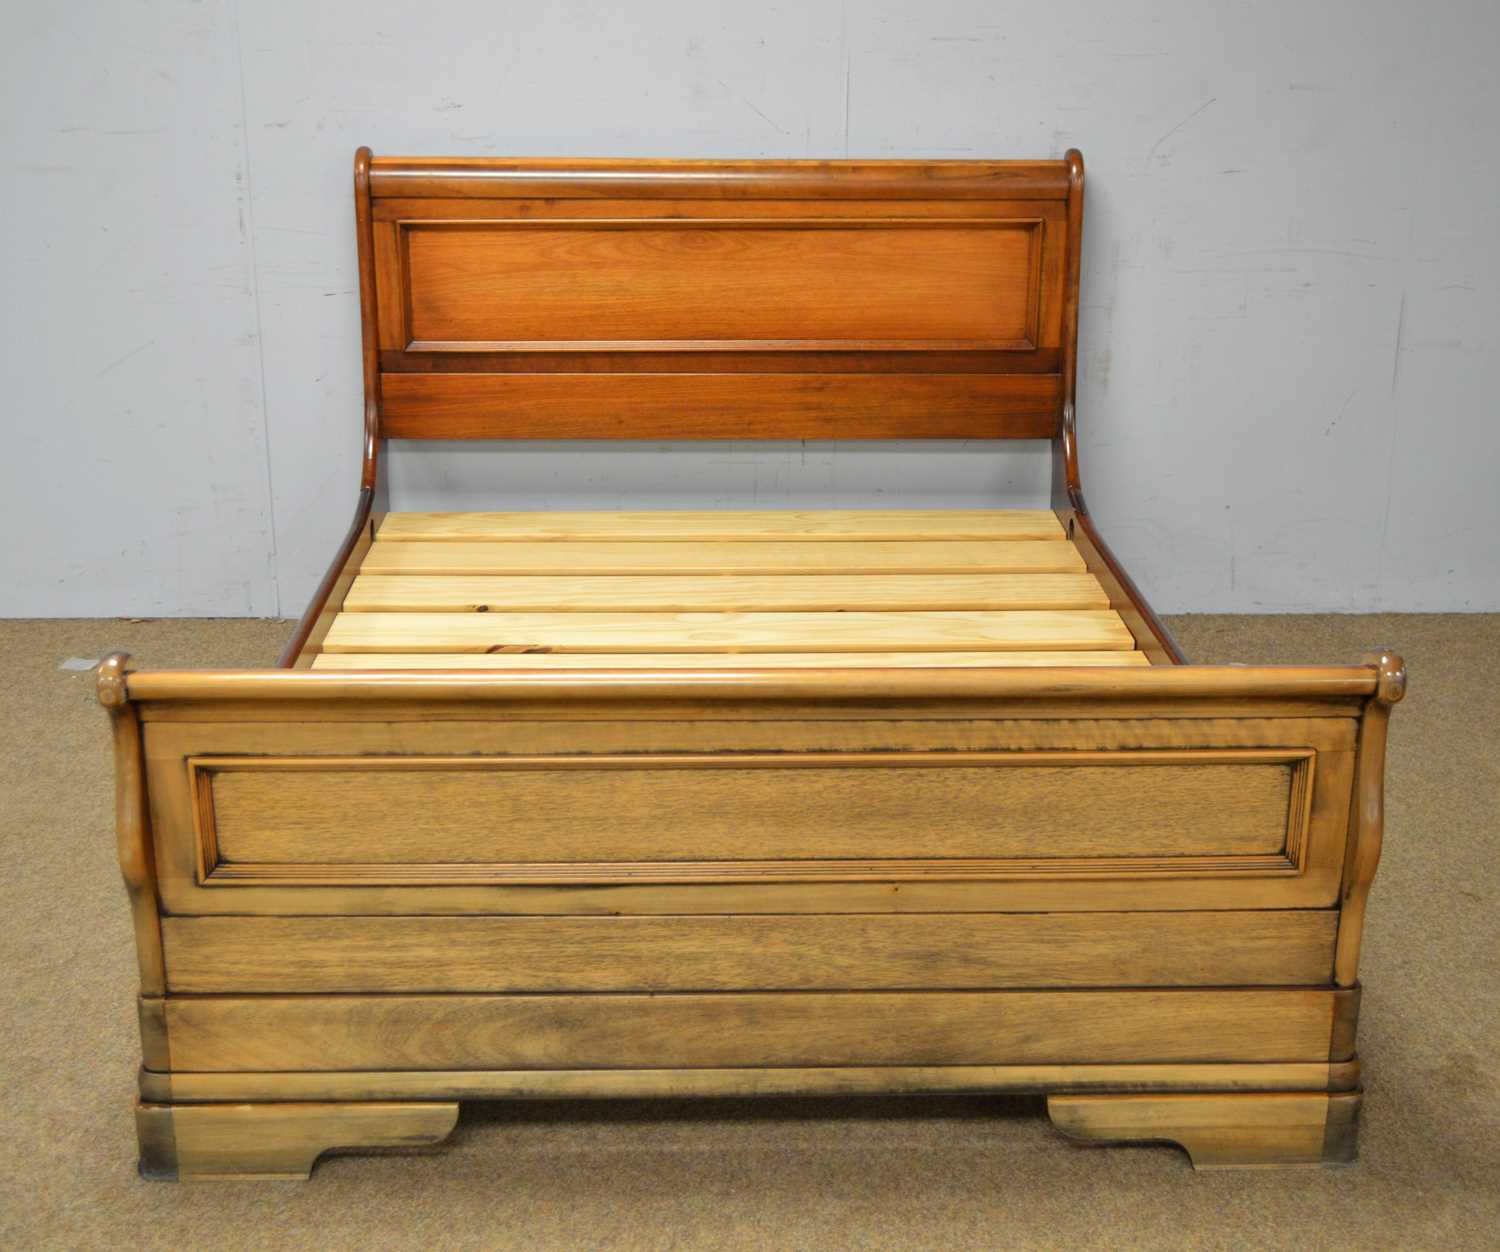 Lot 20 - Willis & Gambier: a Louis Philippe-style cherrywood sleigh bed.